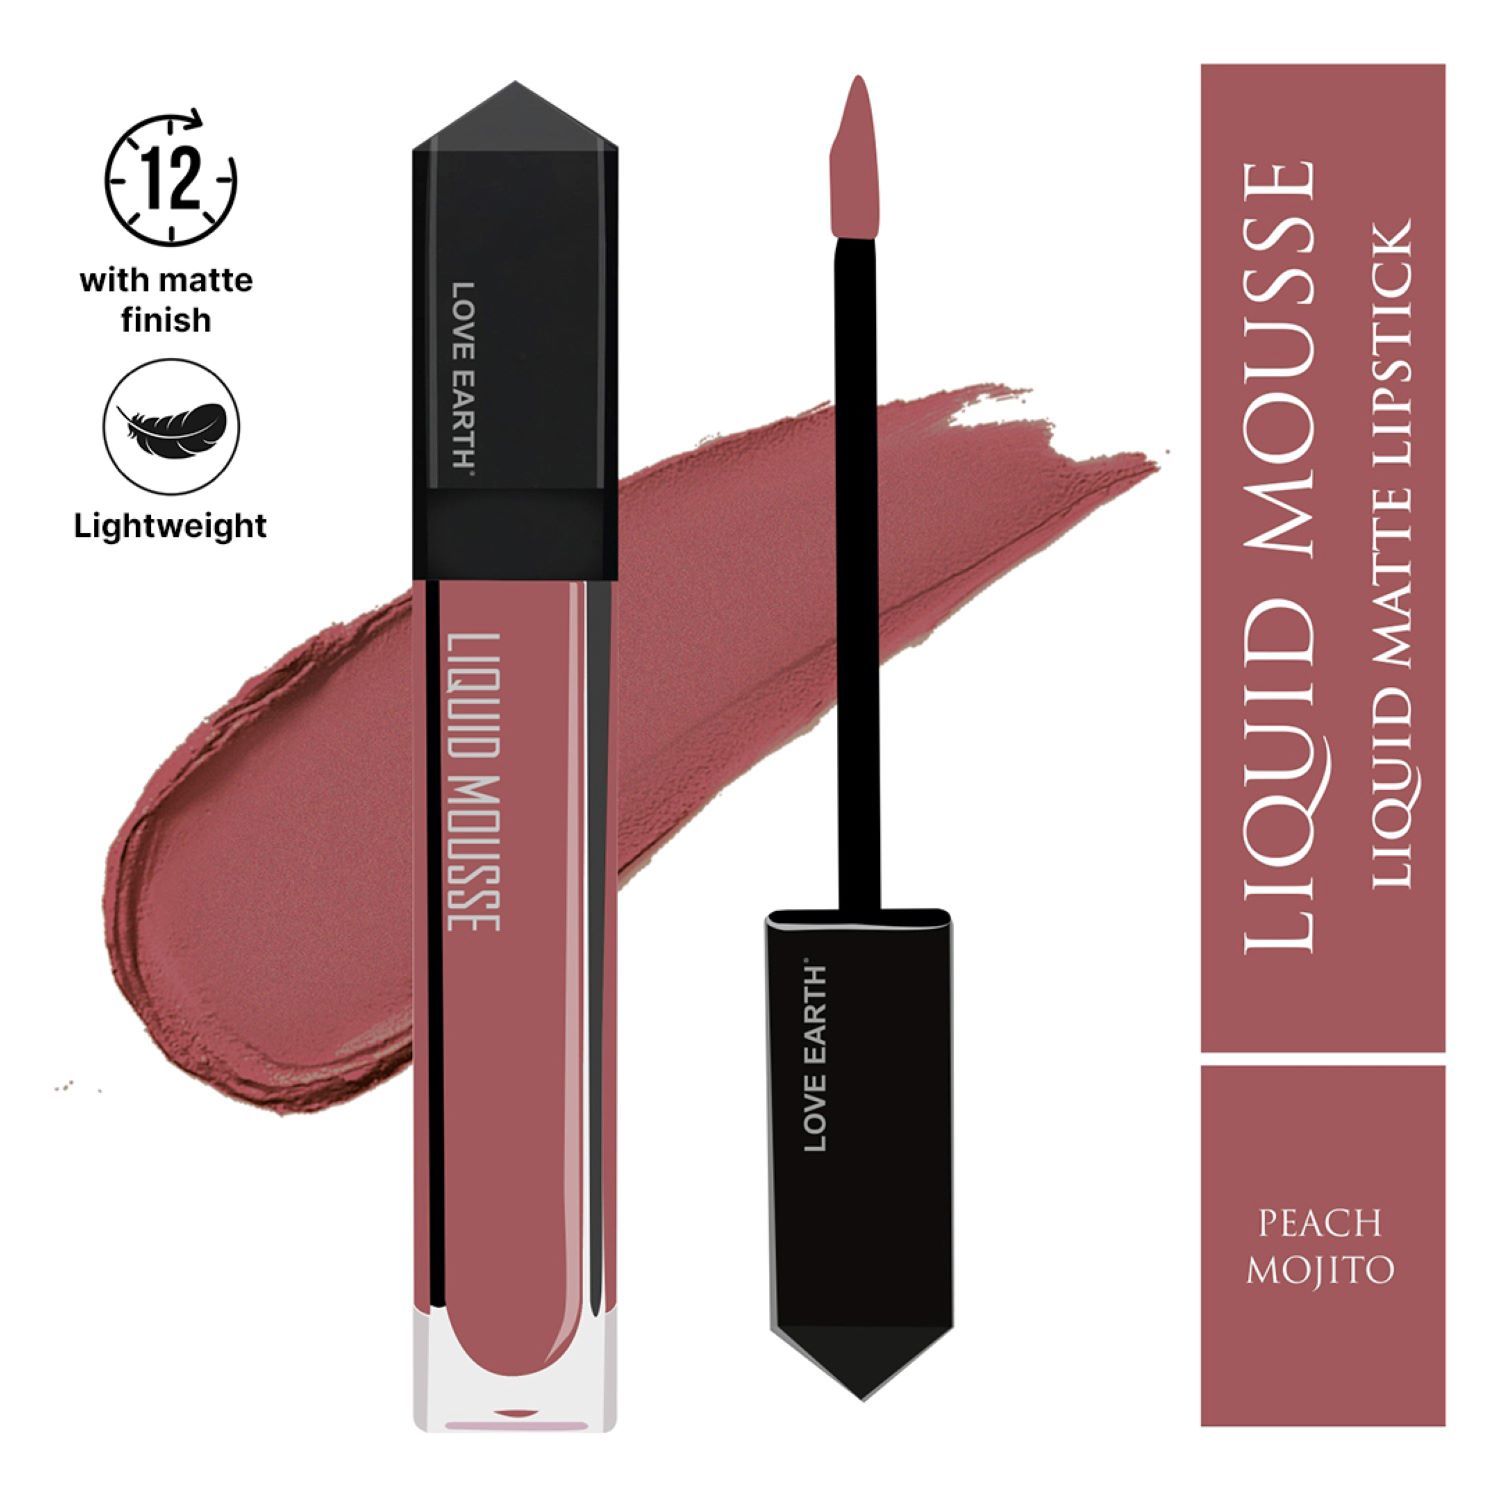 Buy Love Earth Liquid Mousse Lipstick - Peach Mojito Matte Finish | Lightweight, Non-Sticky, Non-Drying,Transferproof, Waterproof | Lasts Up to 12 hours with Vitamin E and Jojoba Oil - 6ml - Purplle